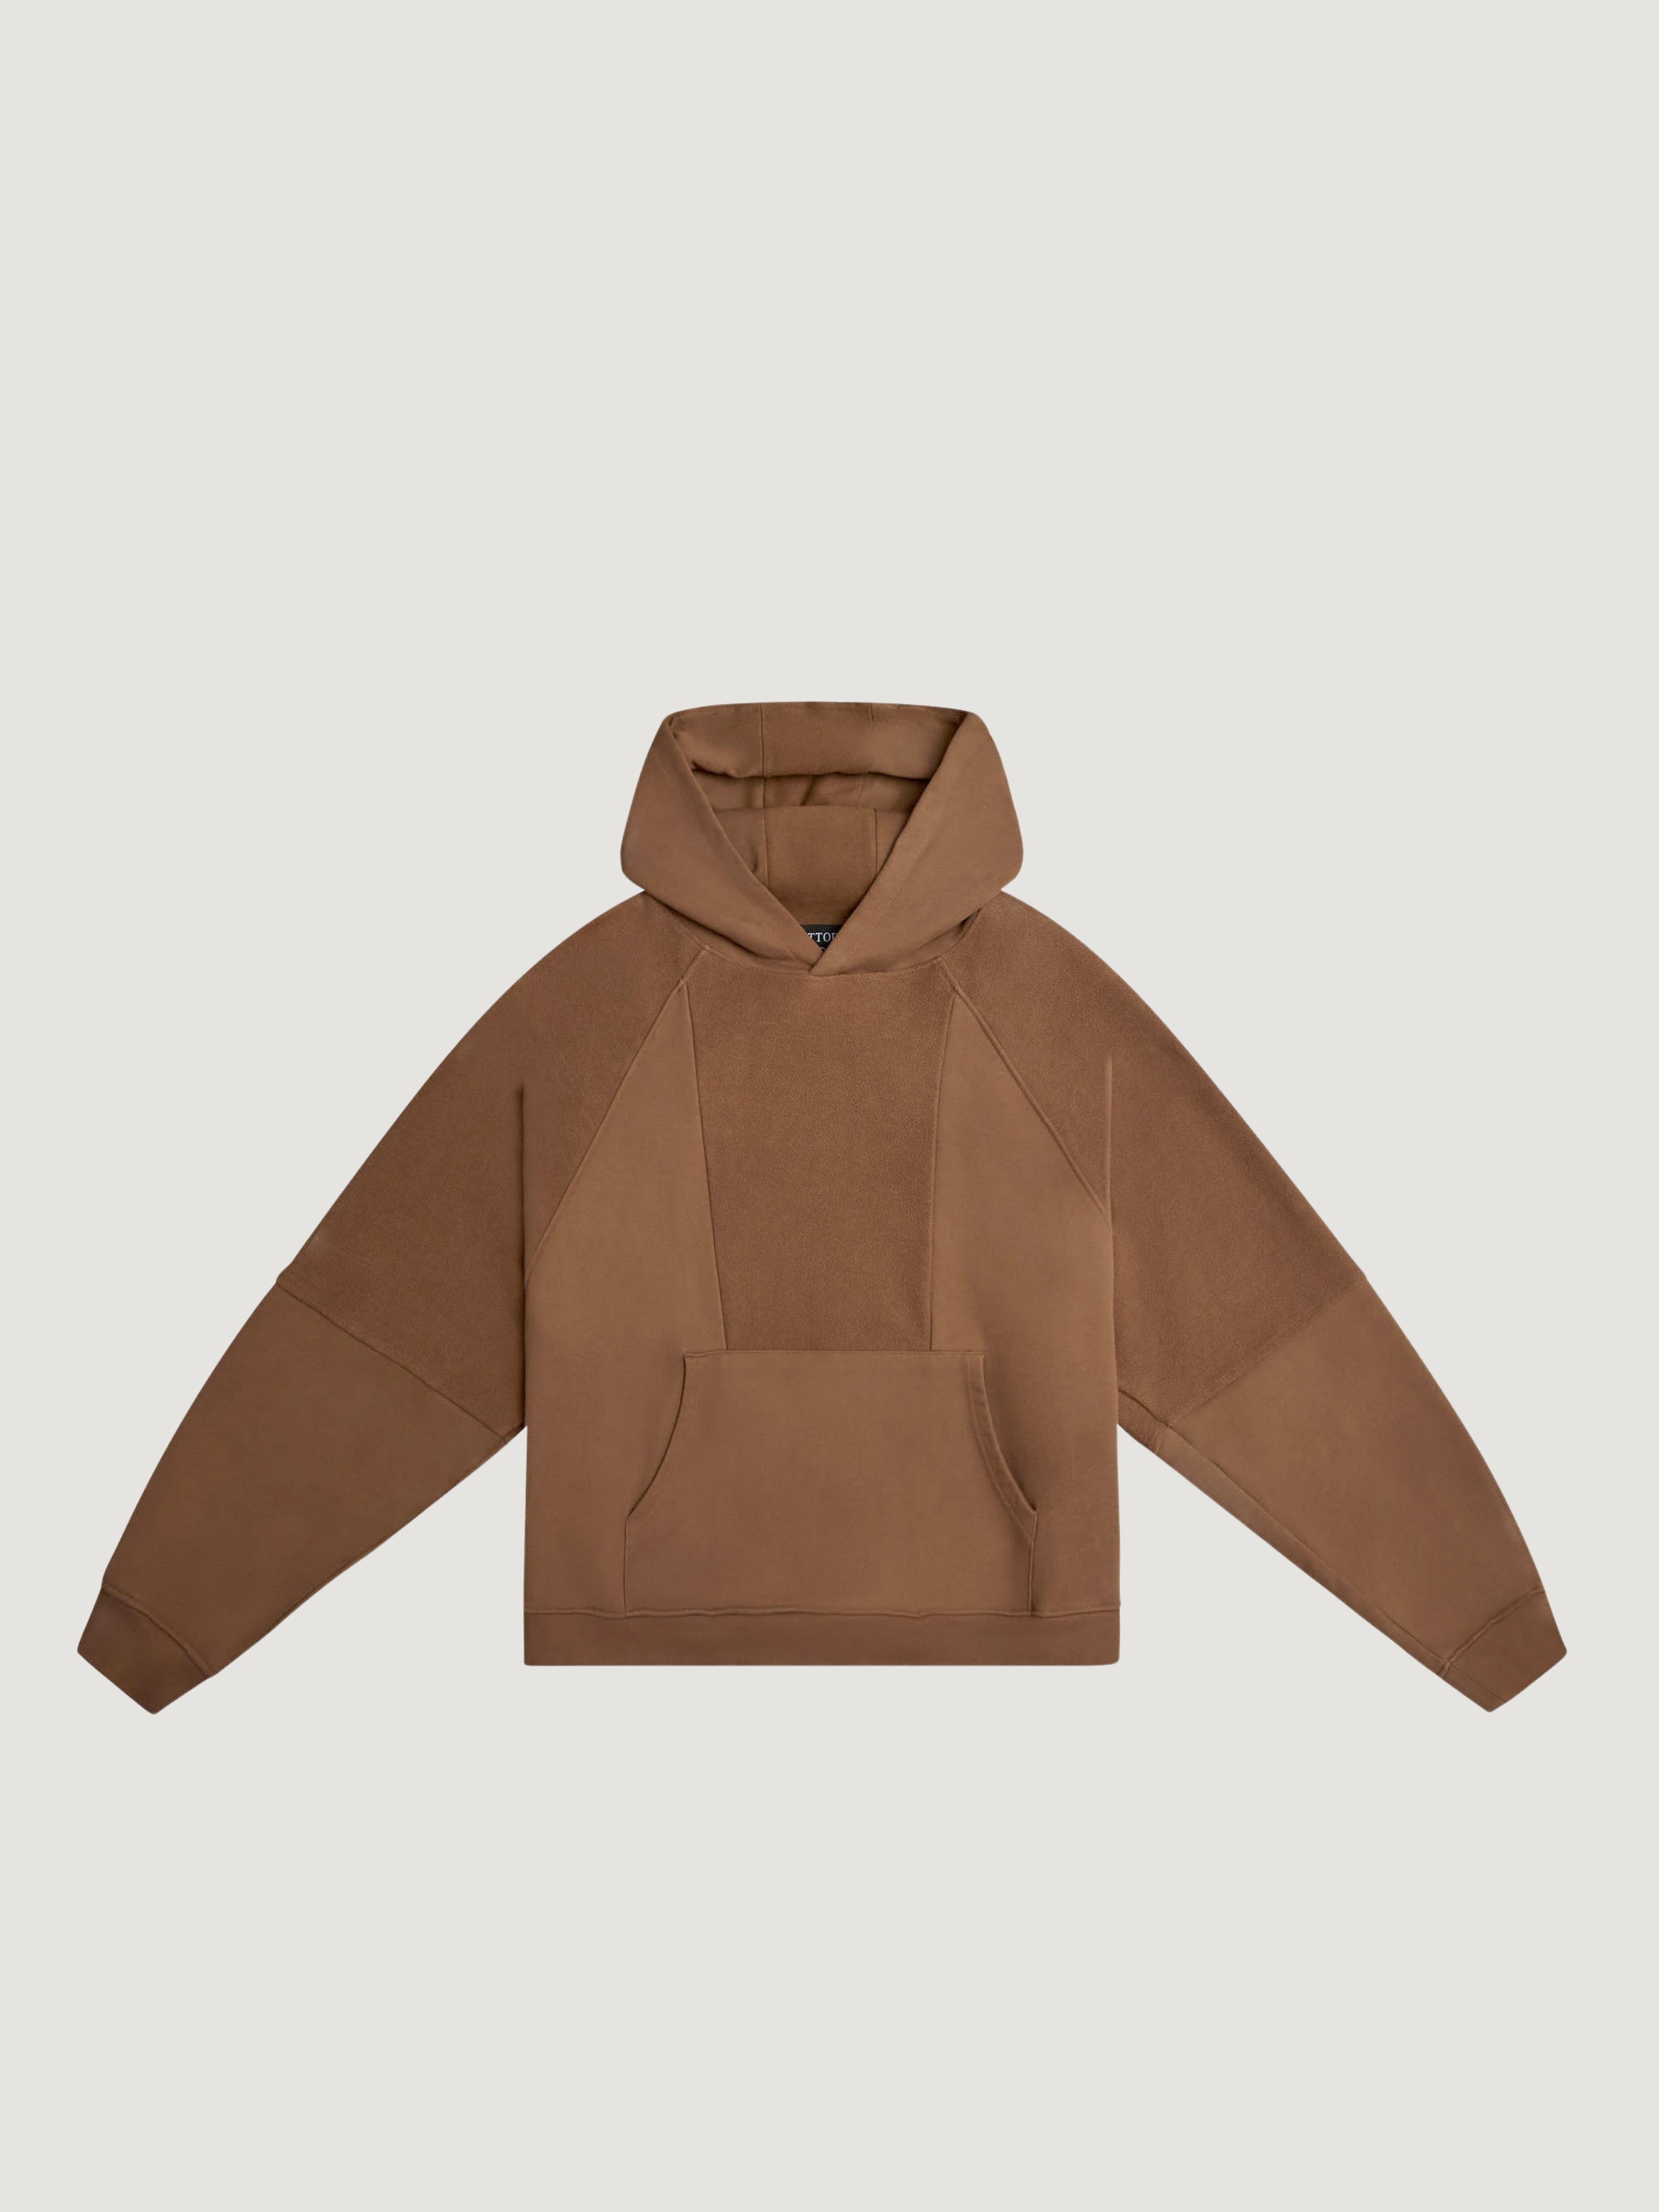 INSIDE OUT HOODIE BROWN - ATTODE